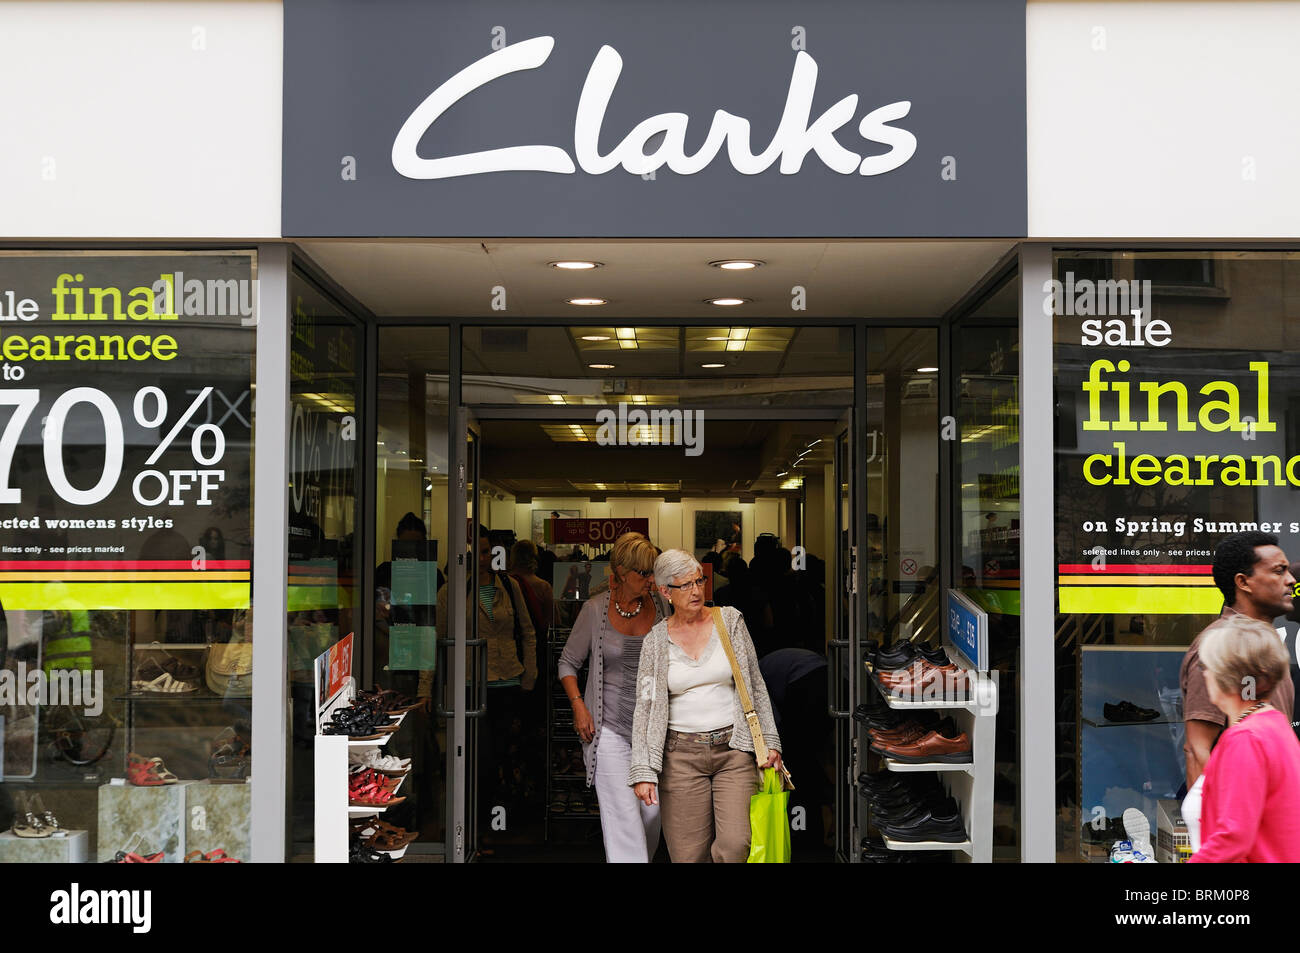 clarks shoes outlet manchester